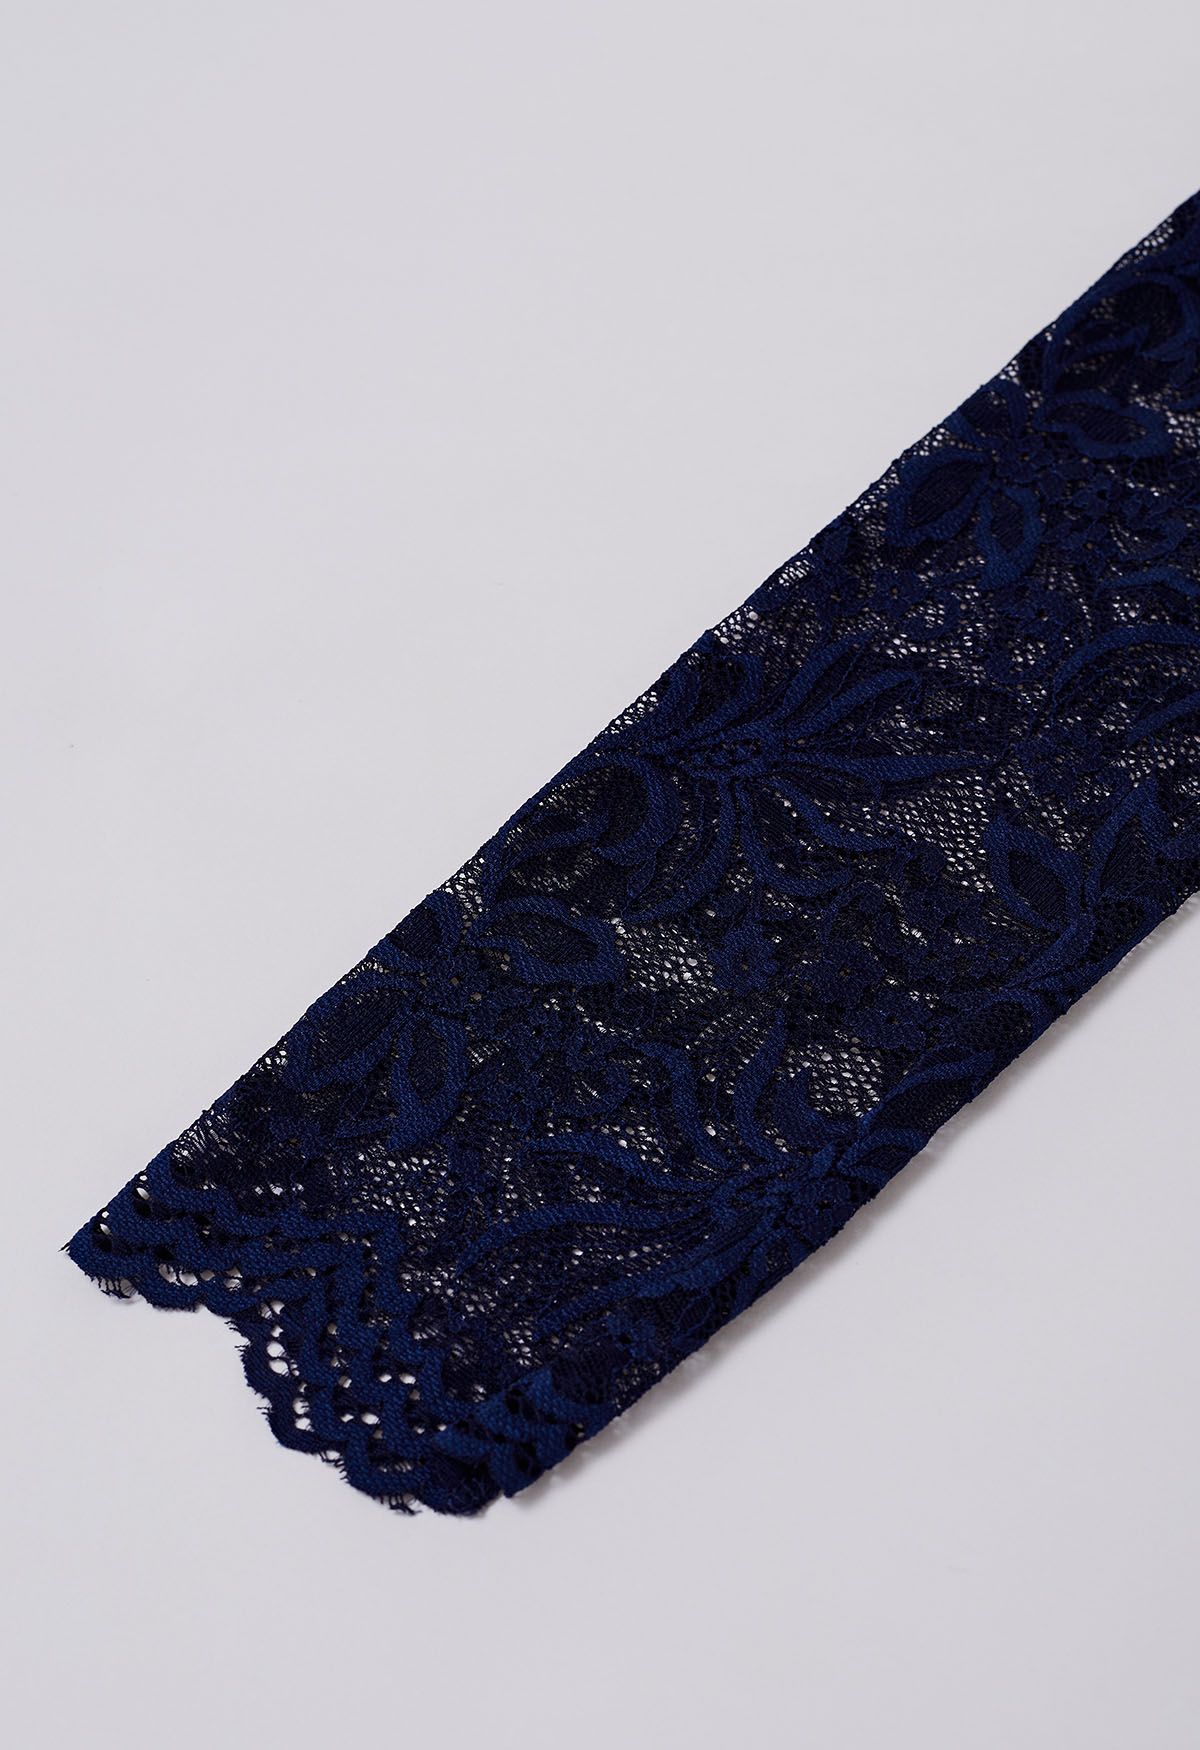 Ethereal Floral Lace Spliced Knit Top in Navy